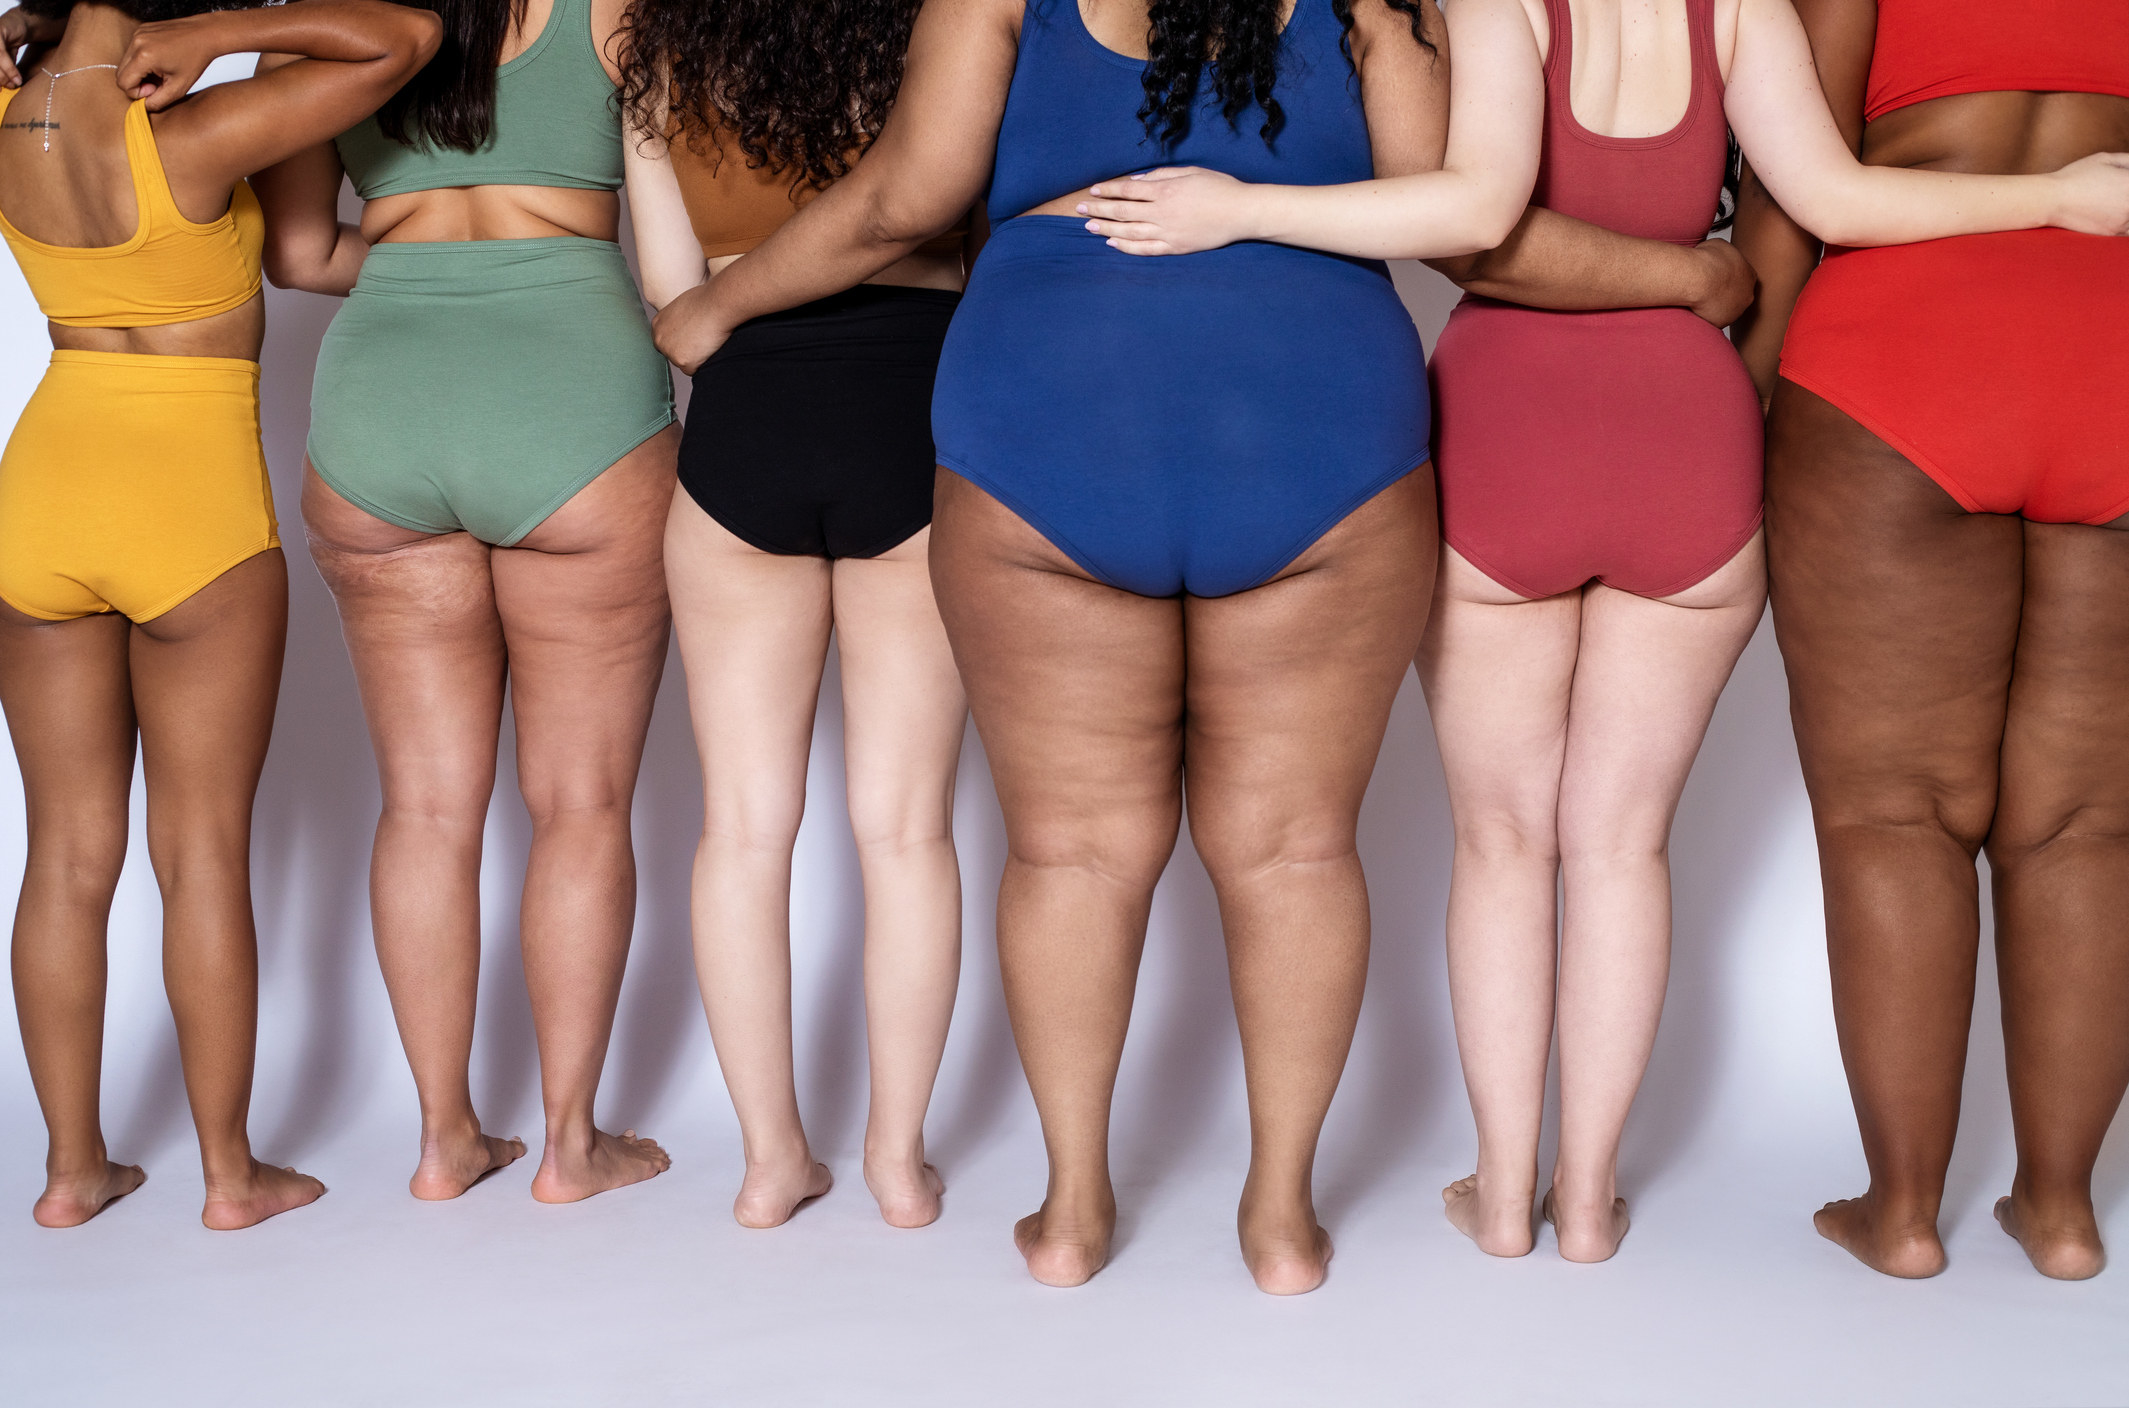 Women of all different shapes and sizes with their backs to the camera in a stock photo. They&#x27;re all wearing sports bras and underwear in various colors